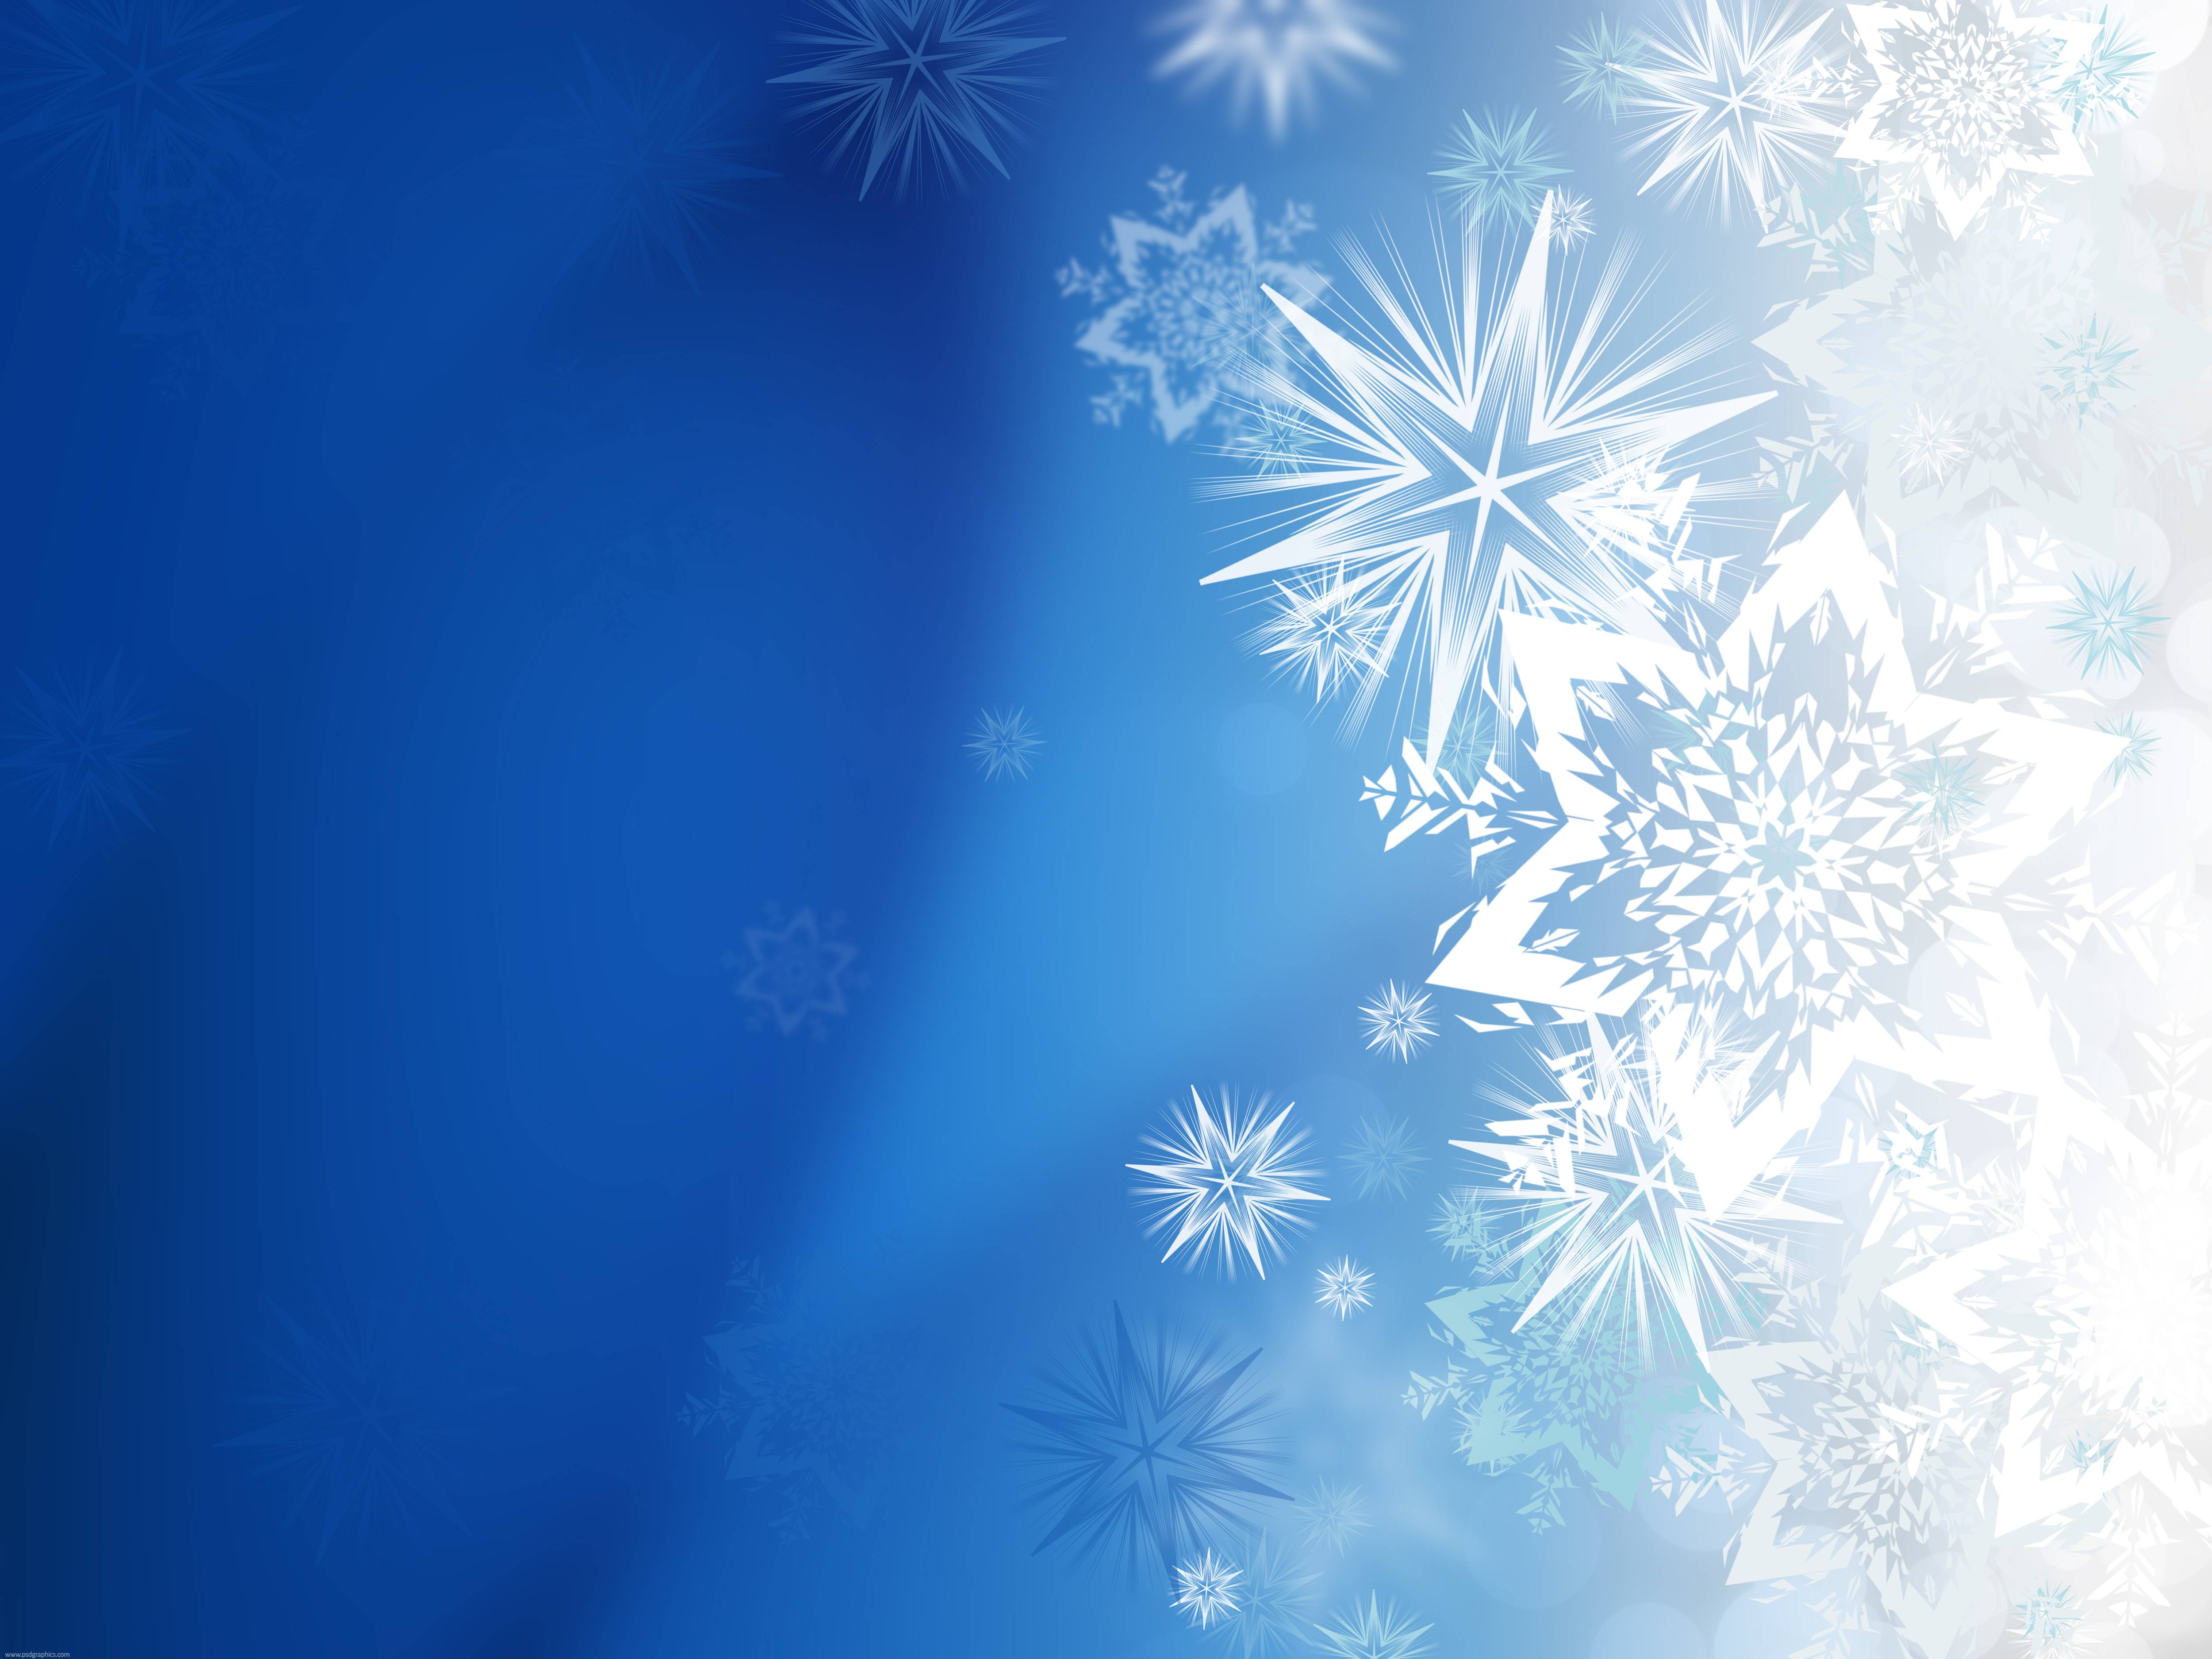 Winter Themed Powerpoint Template from www.slidebackground.com